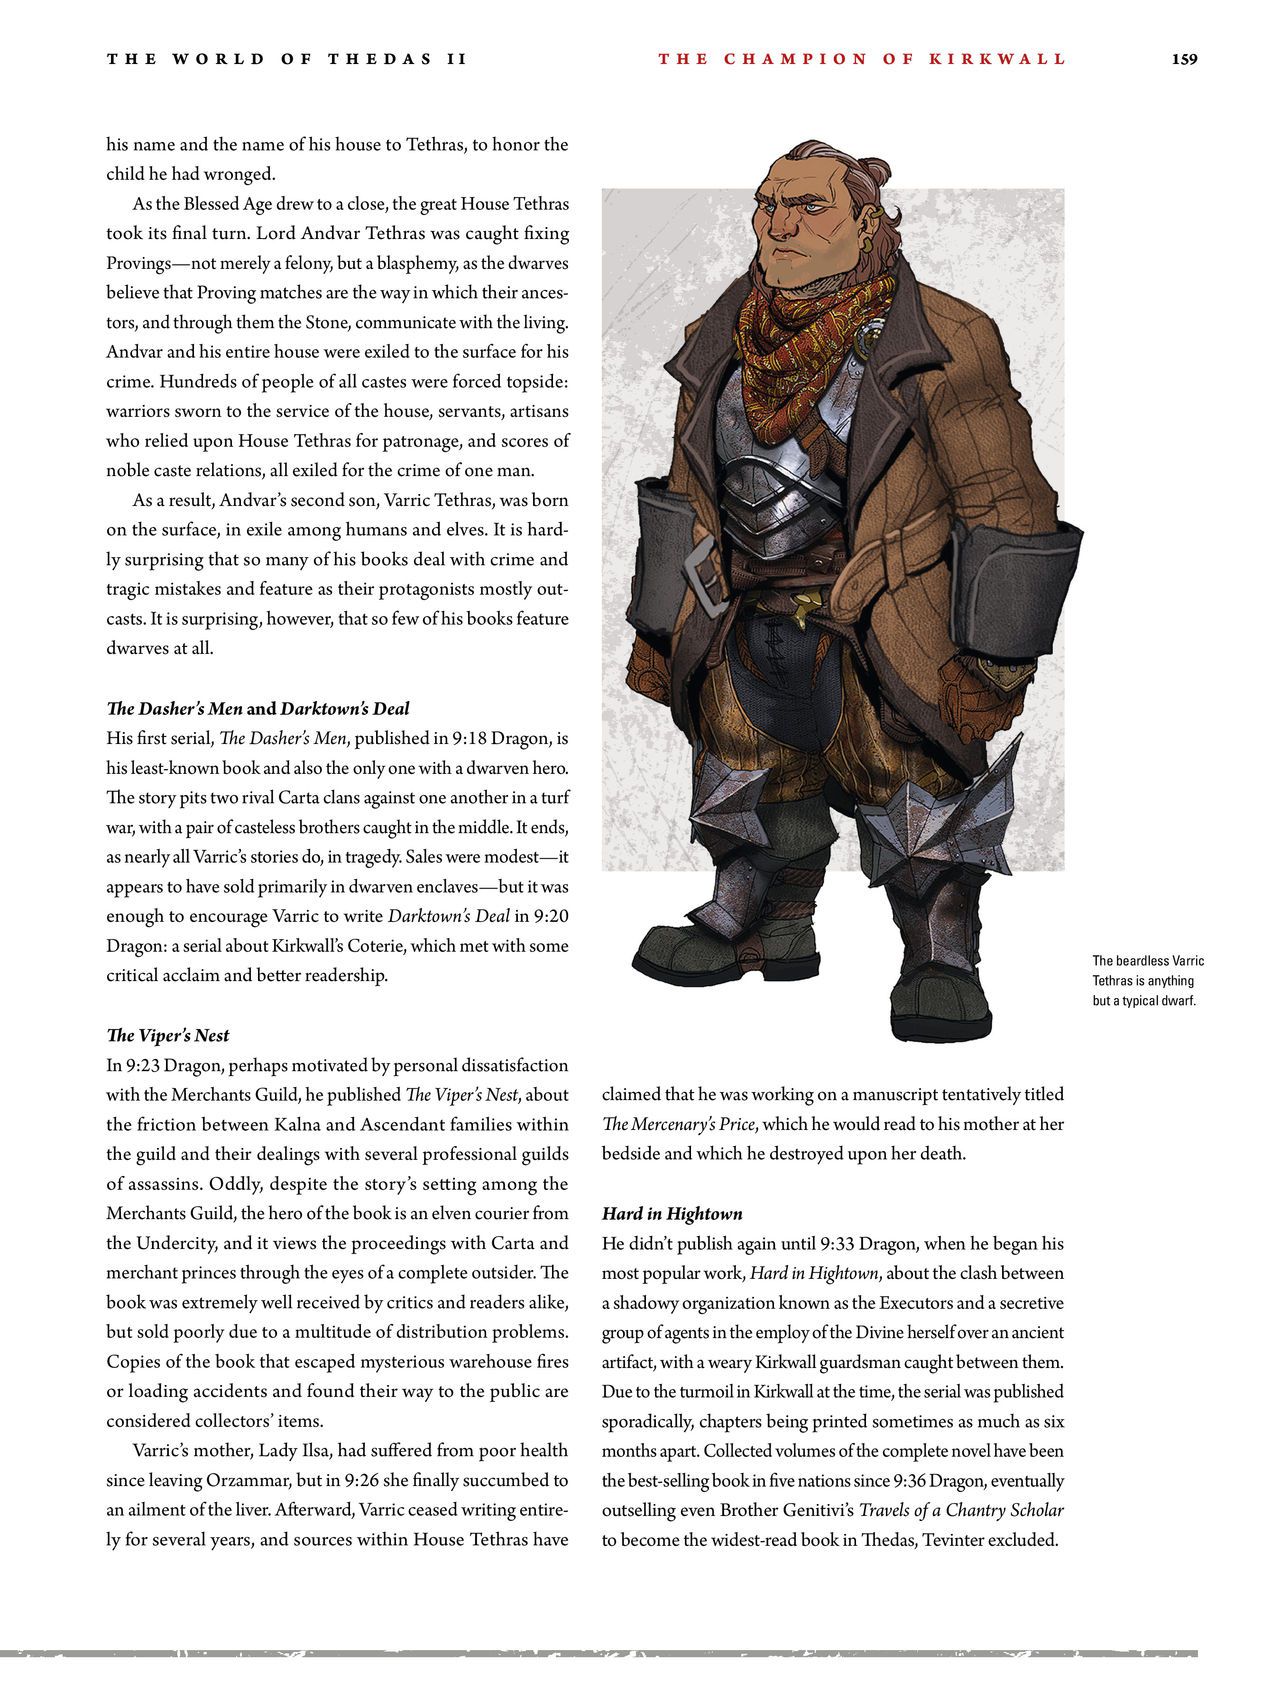 Dragon Age - The World of Thedas v02 155